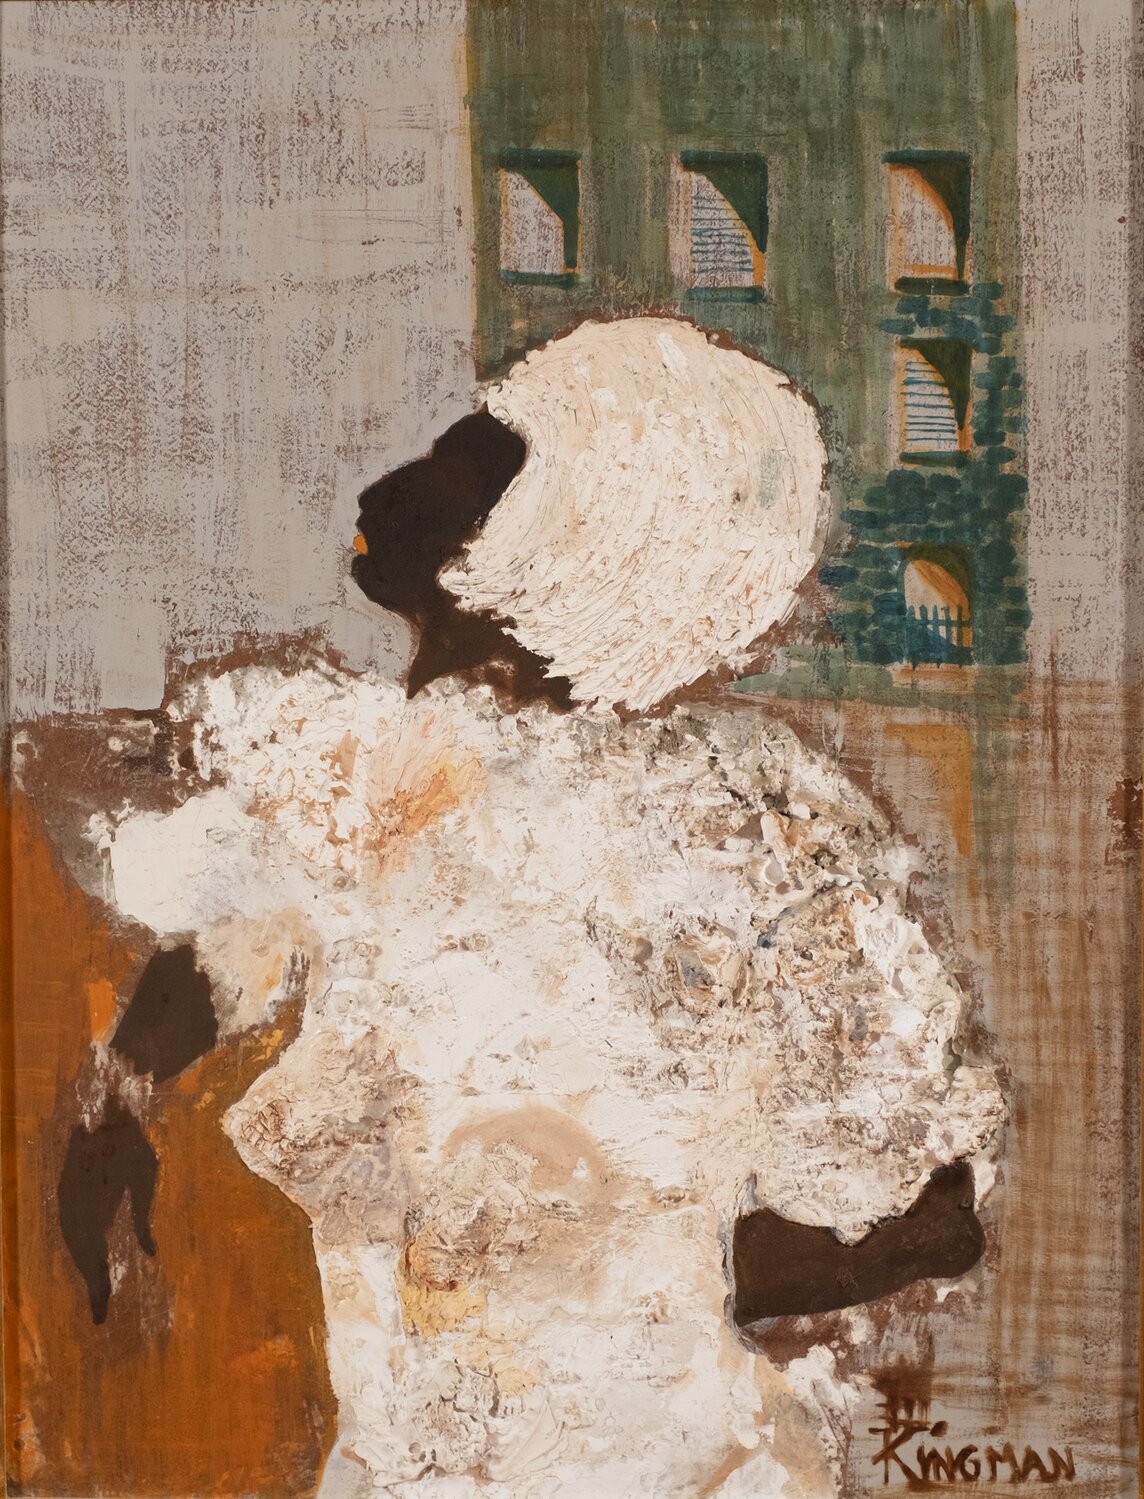 Dong Kingman’s Harlem Girl, undated oil and collage on masonite, captures the spirit and resilience of an African American woman in an urban environment. A gift to the museum by Dr. Alfred Brotman.